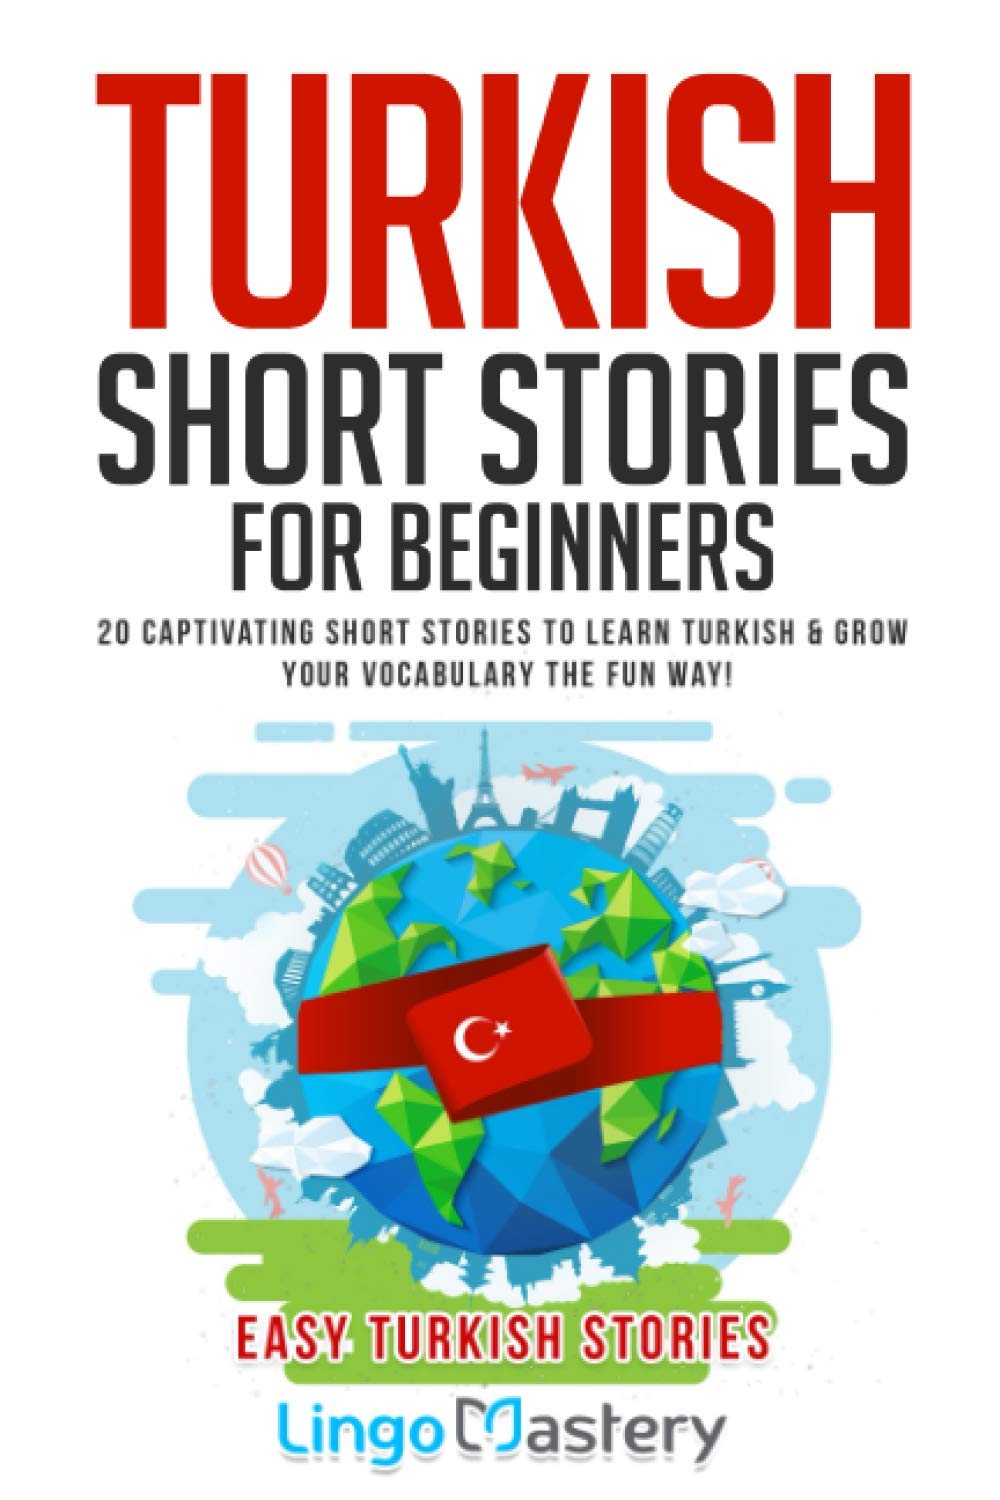 Turkish Short Stories for Beginners: 20 Captivating Short Stories to Learn Turkish & Grow Your Vocabulary the Fun Way! (Easy Turkish Stories)